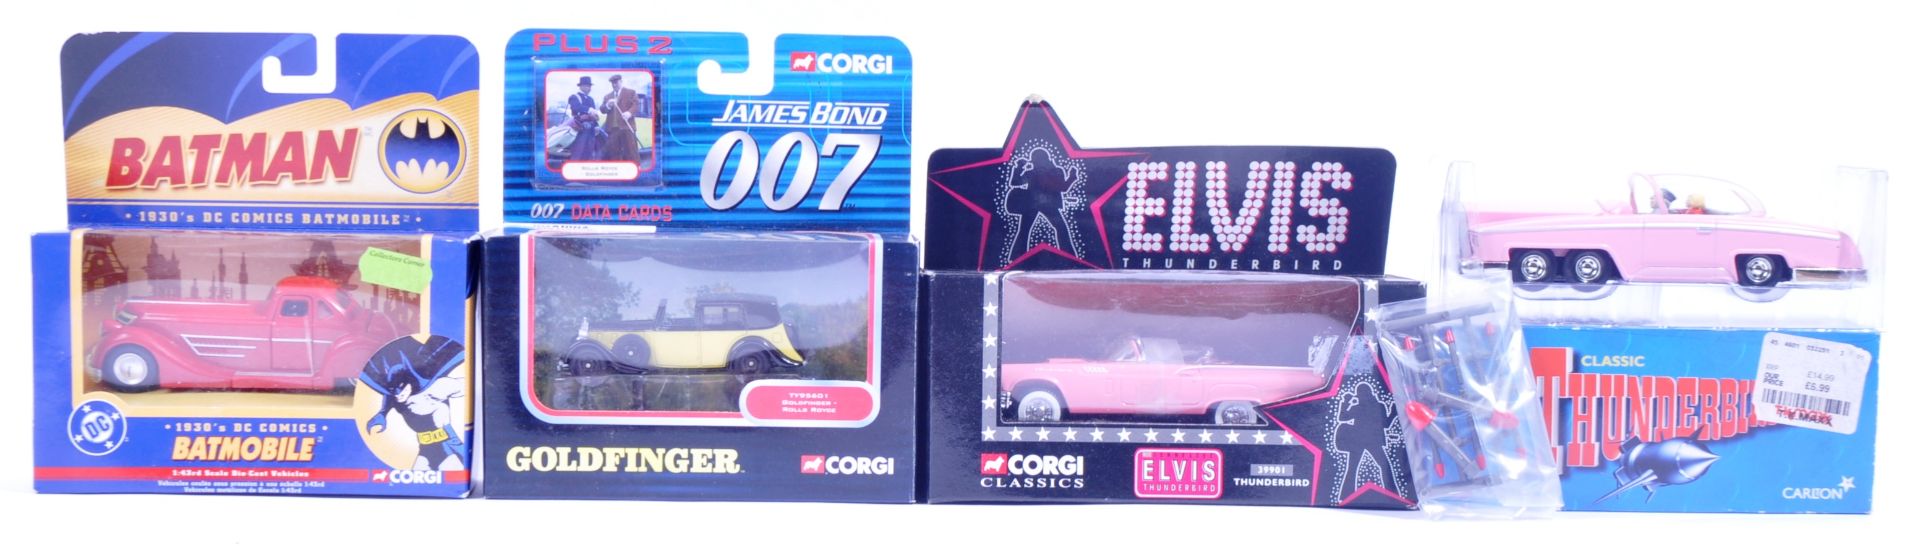 COLLECTION OF CORGI TV & FILM RELATED DIECAST MODEL CARS